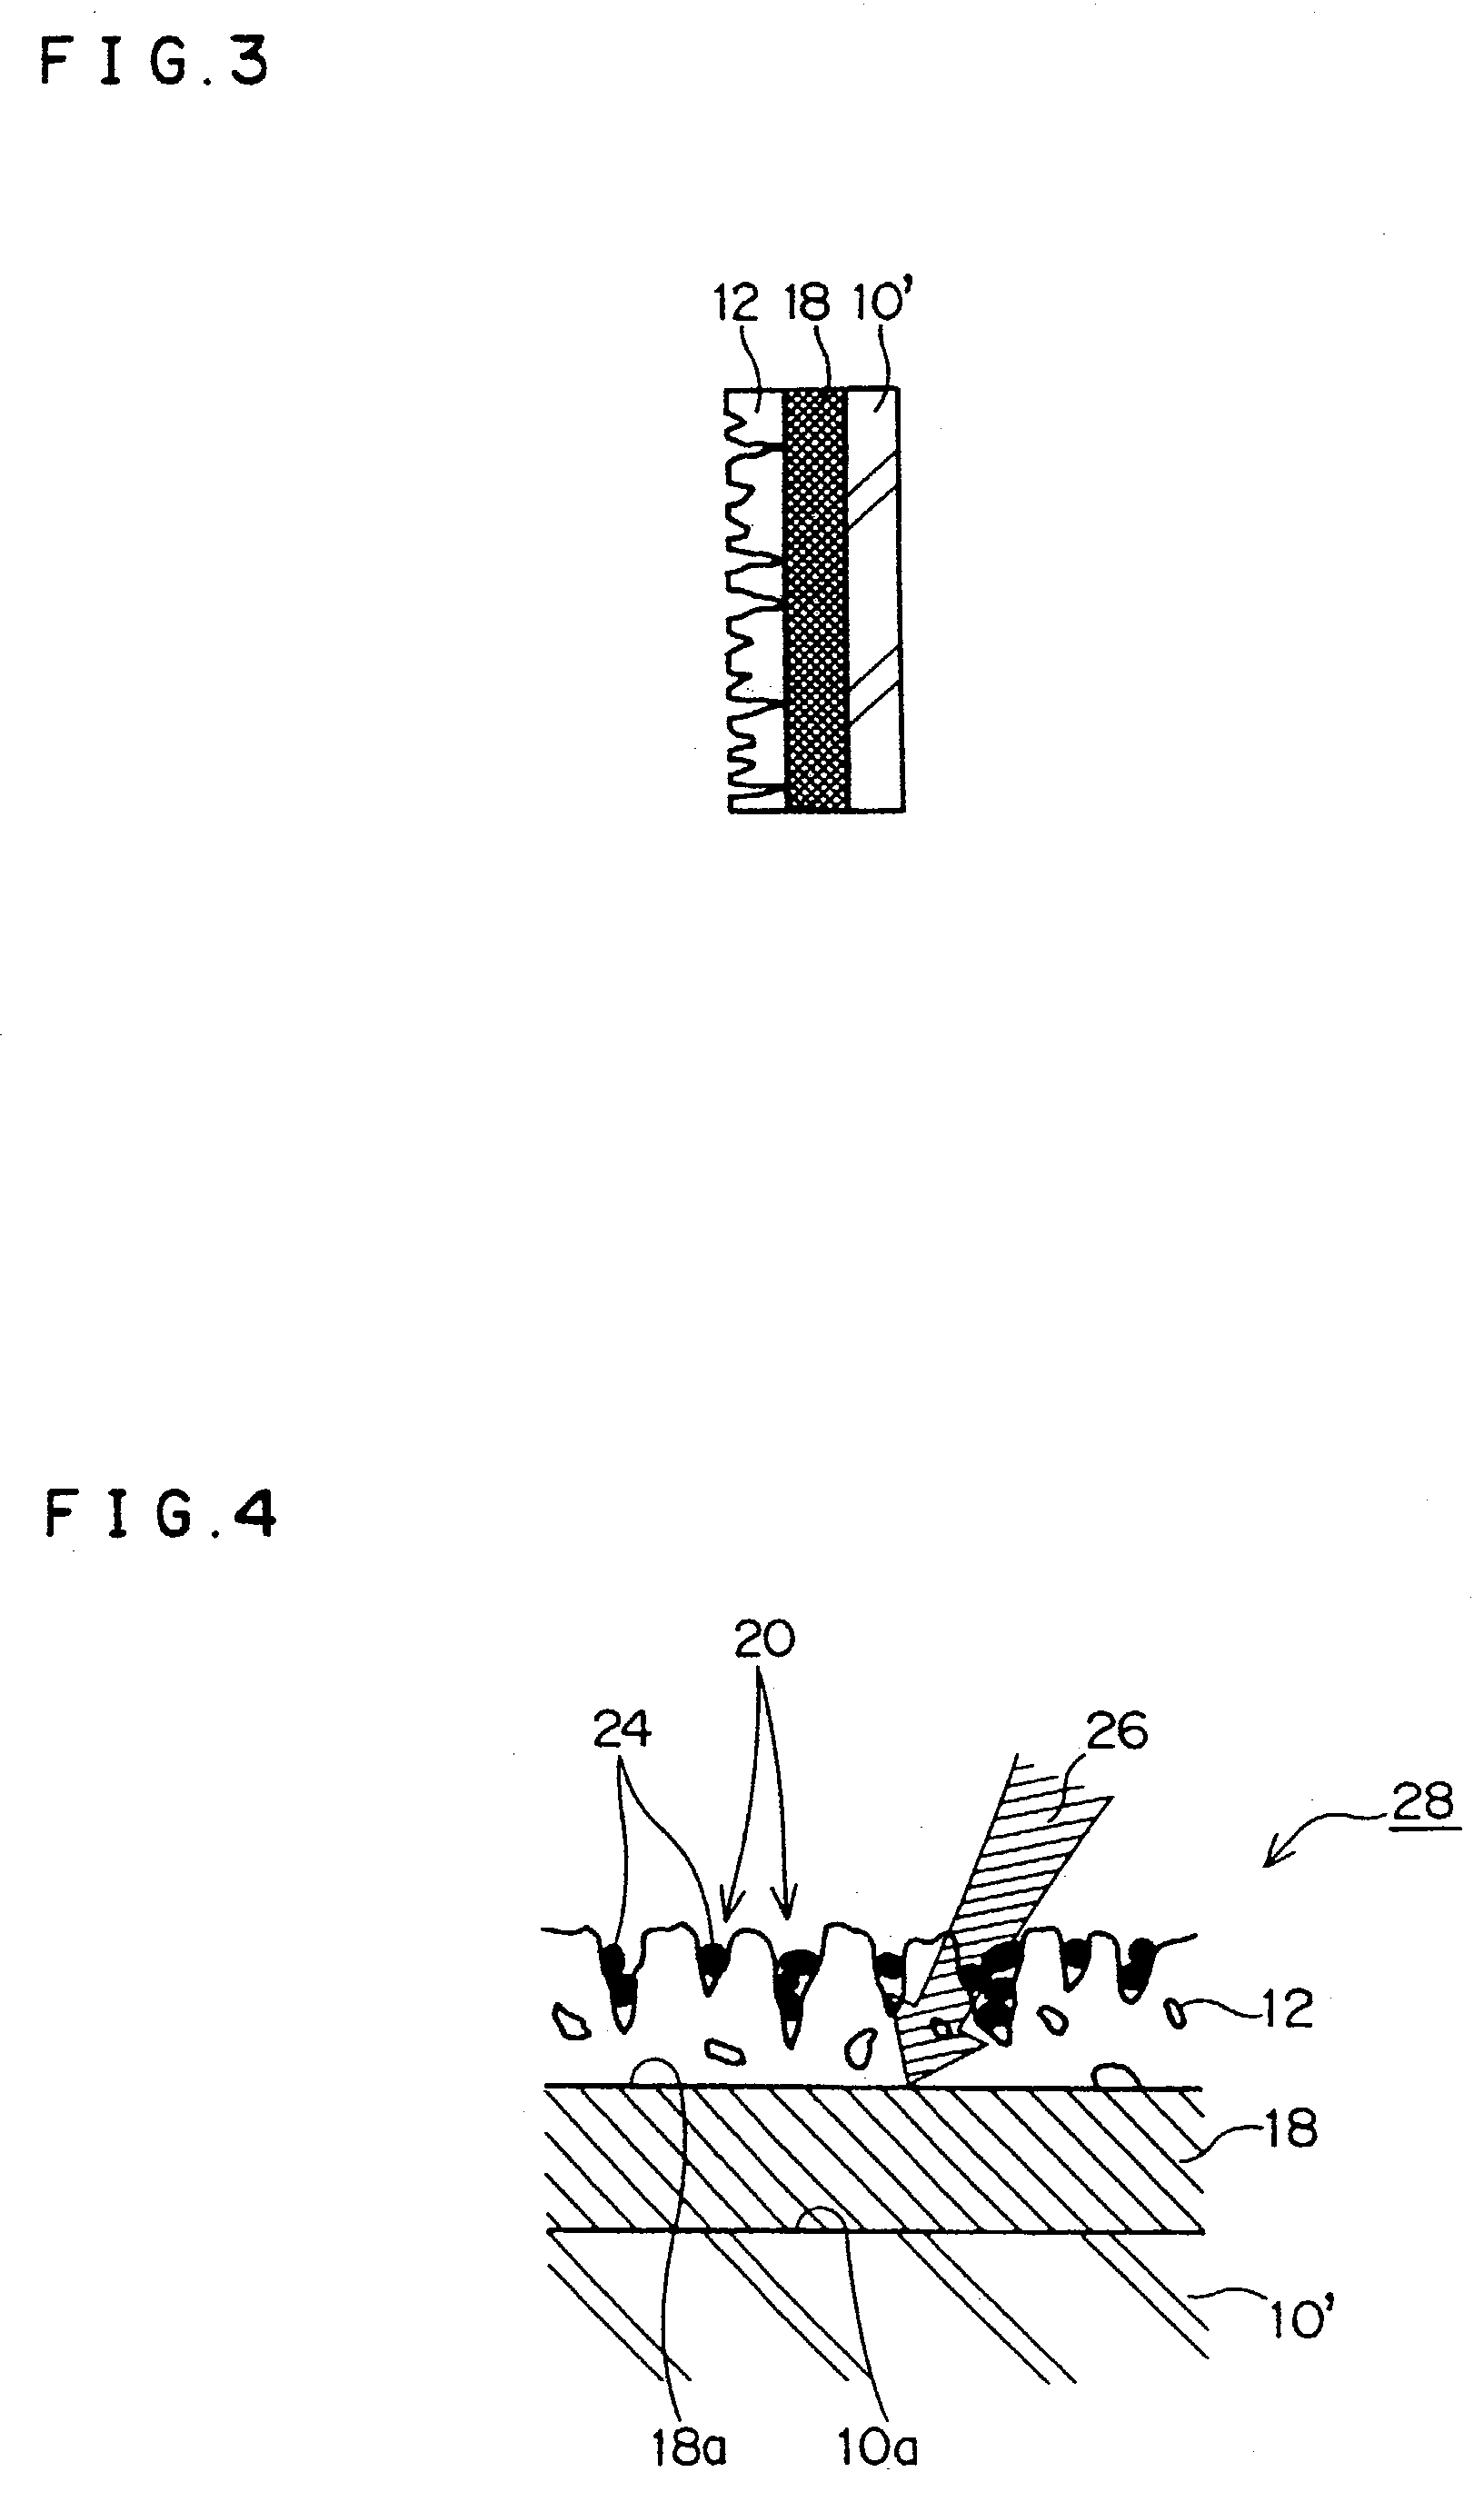 Anti-fogging element and method for forming the same